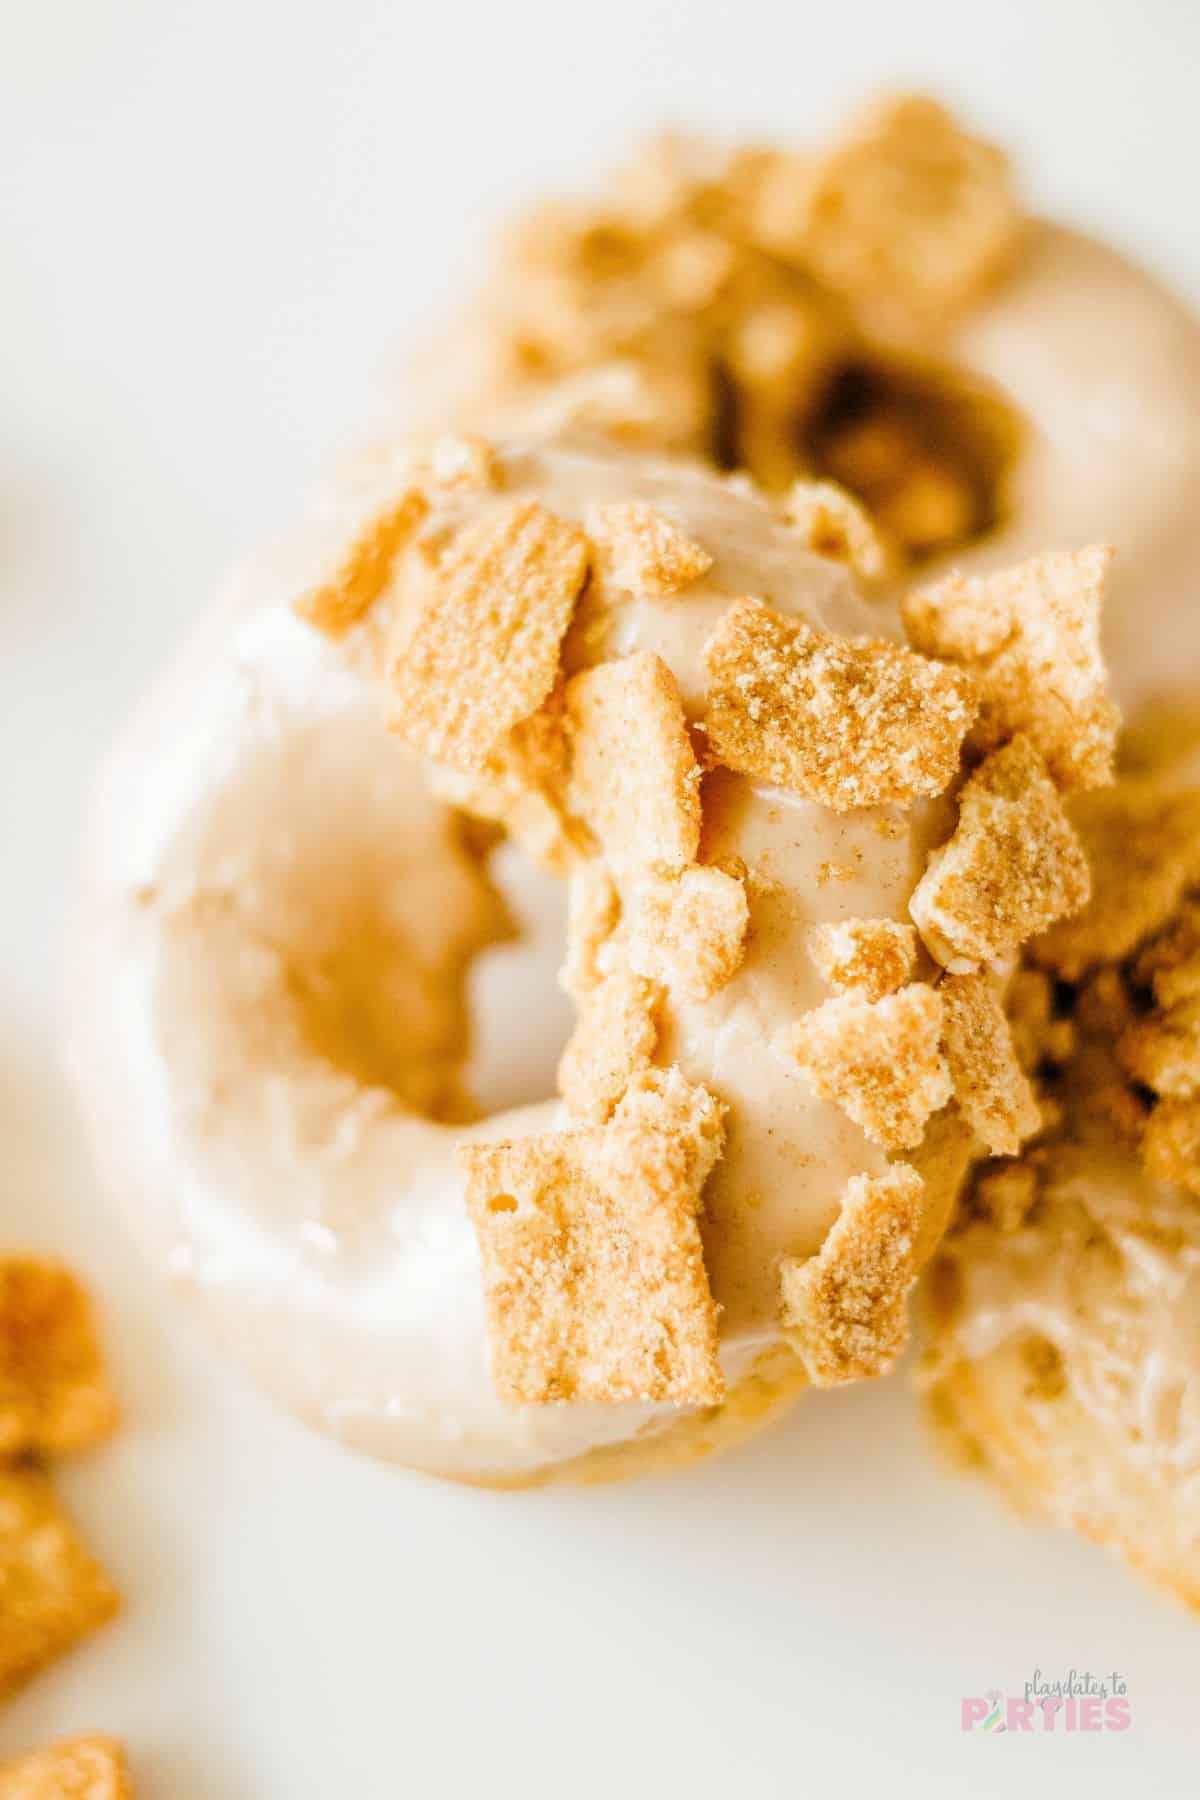 The shiny glaze and crushed cereal add sweetness and crunch to the donuts